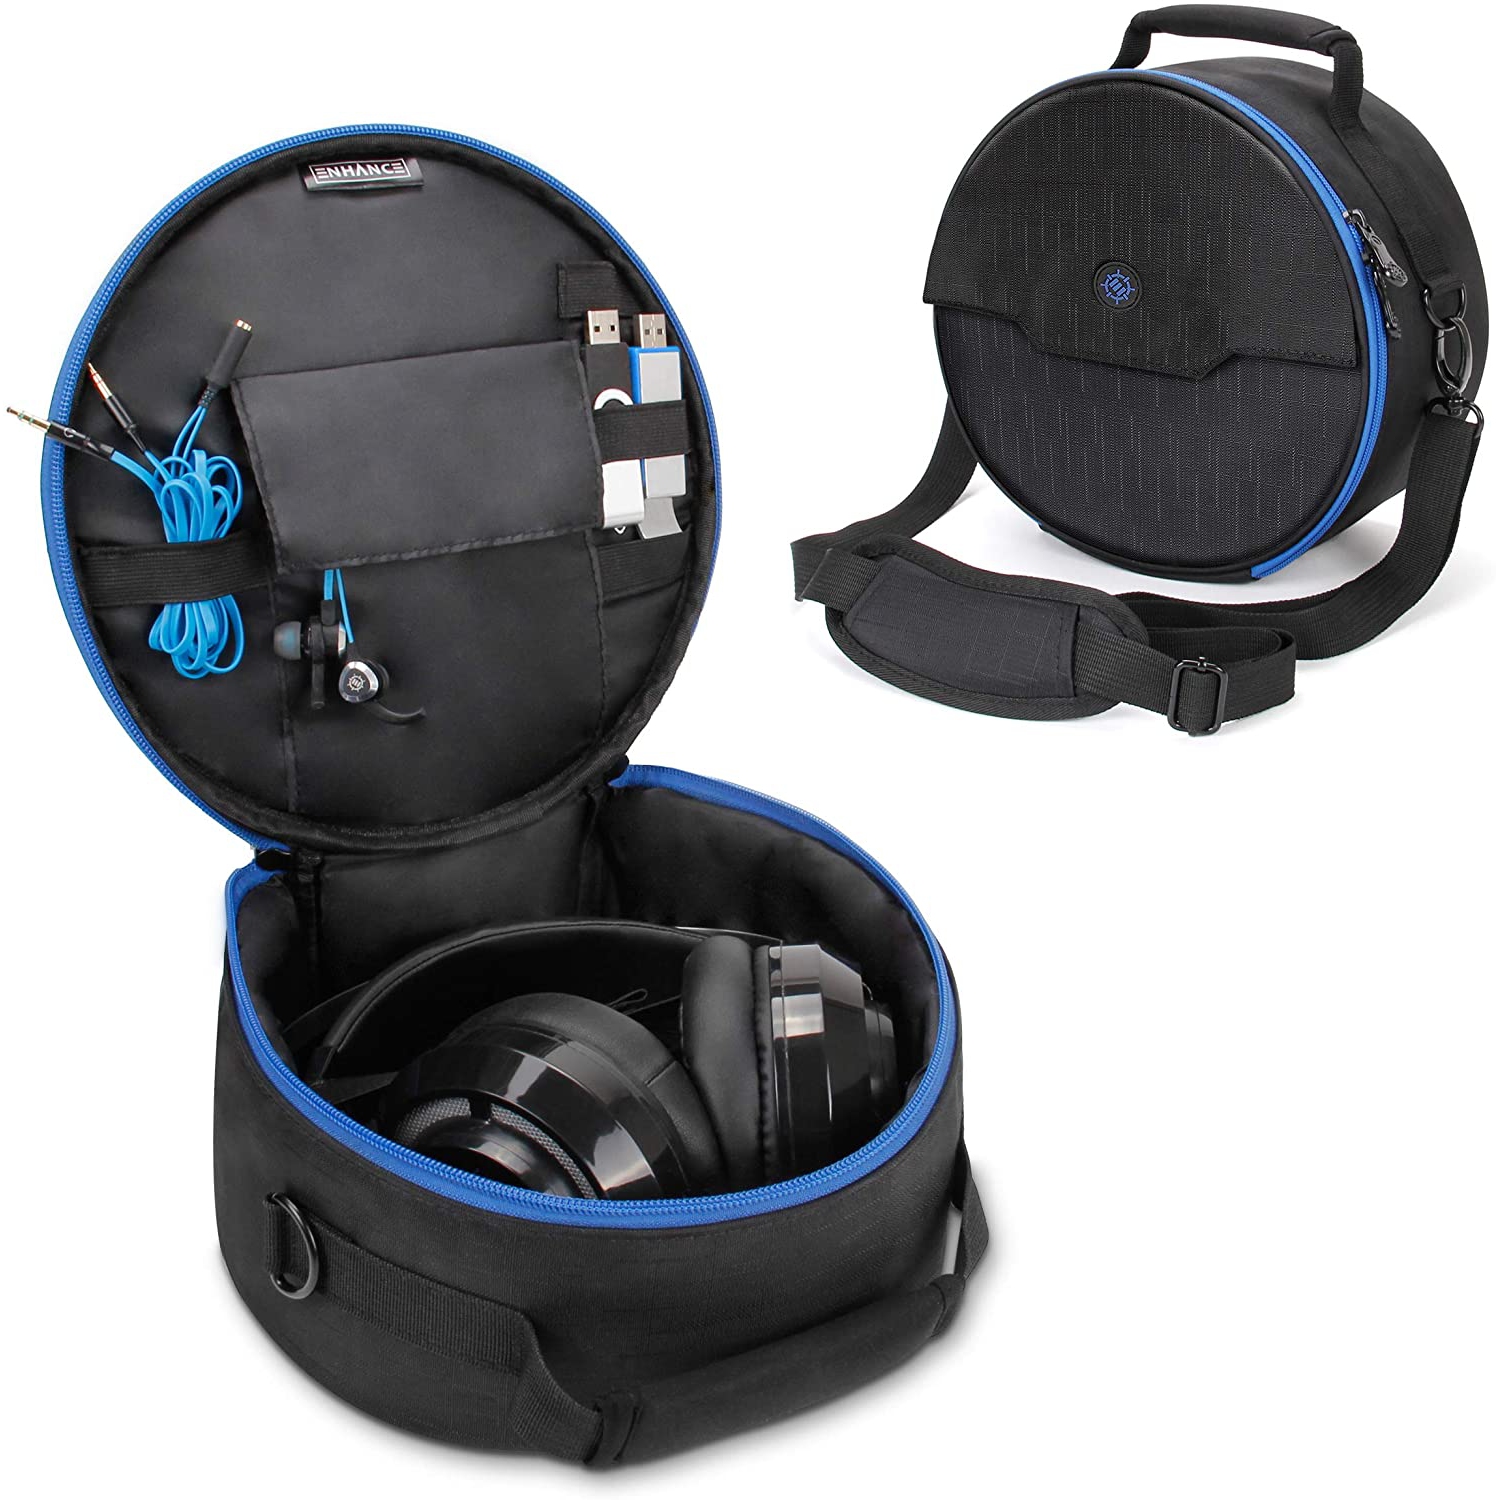 ENHANCE Portable Headphone Case for Wired & Wireless Headsets - Compatible with Sony Pulse 3D, Beats, Bose & Gaming Headphones - Extra Padding, Accessory Storage, Strap & Carrying Handle - Blue